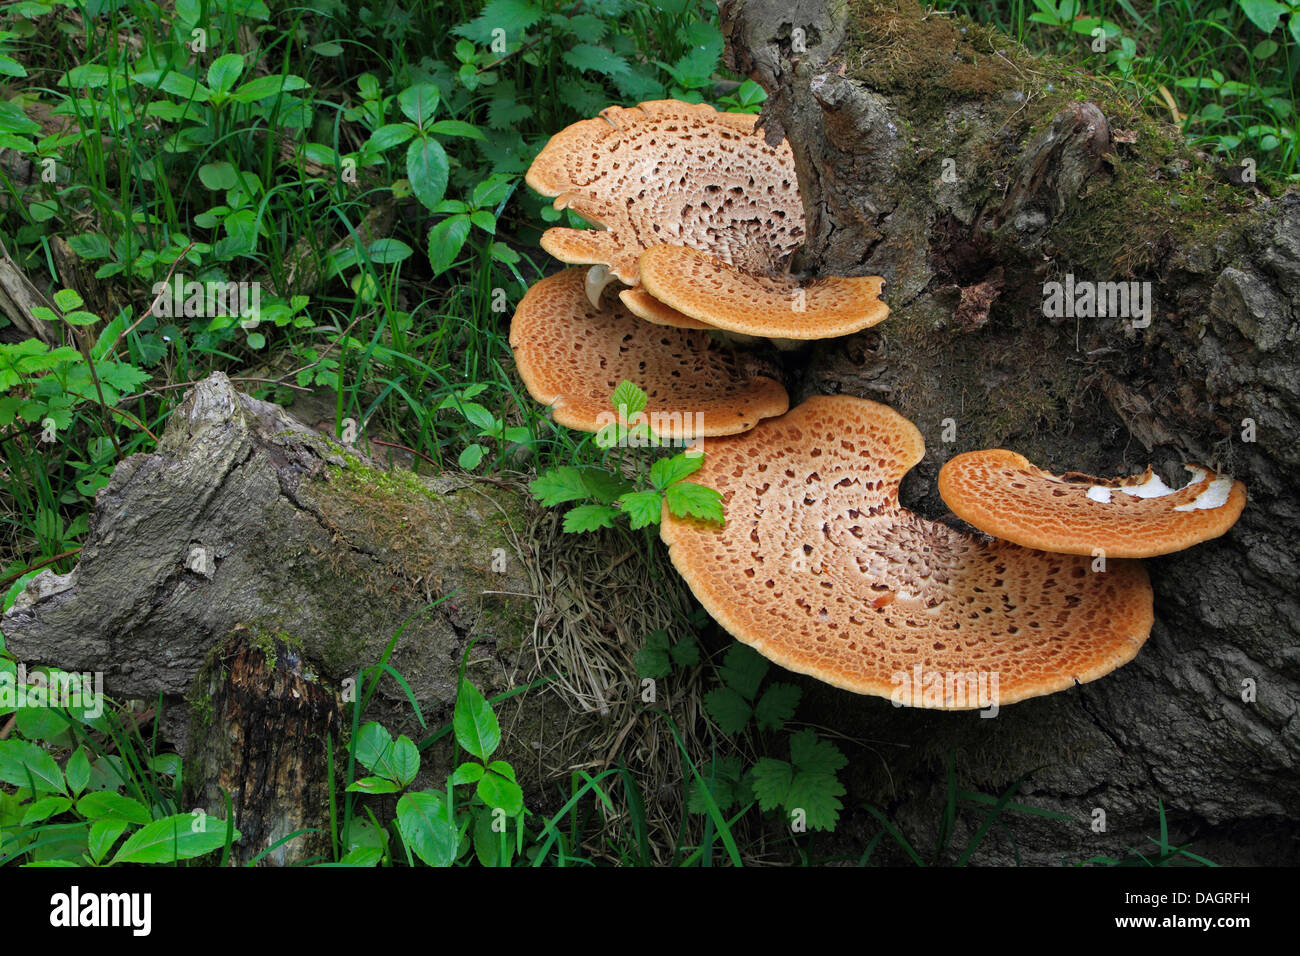 dryad's saddle (Polyporus squamosus), fruiting bodies on a tree root, Germany Stock Photo